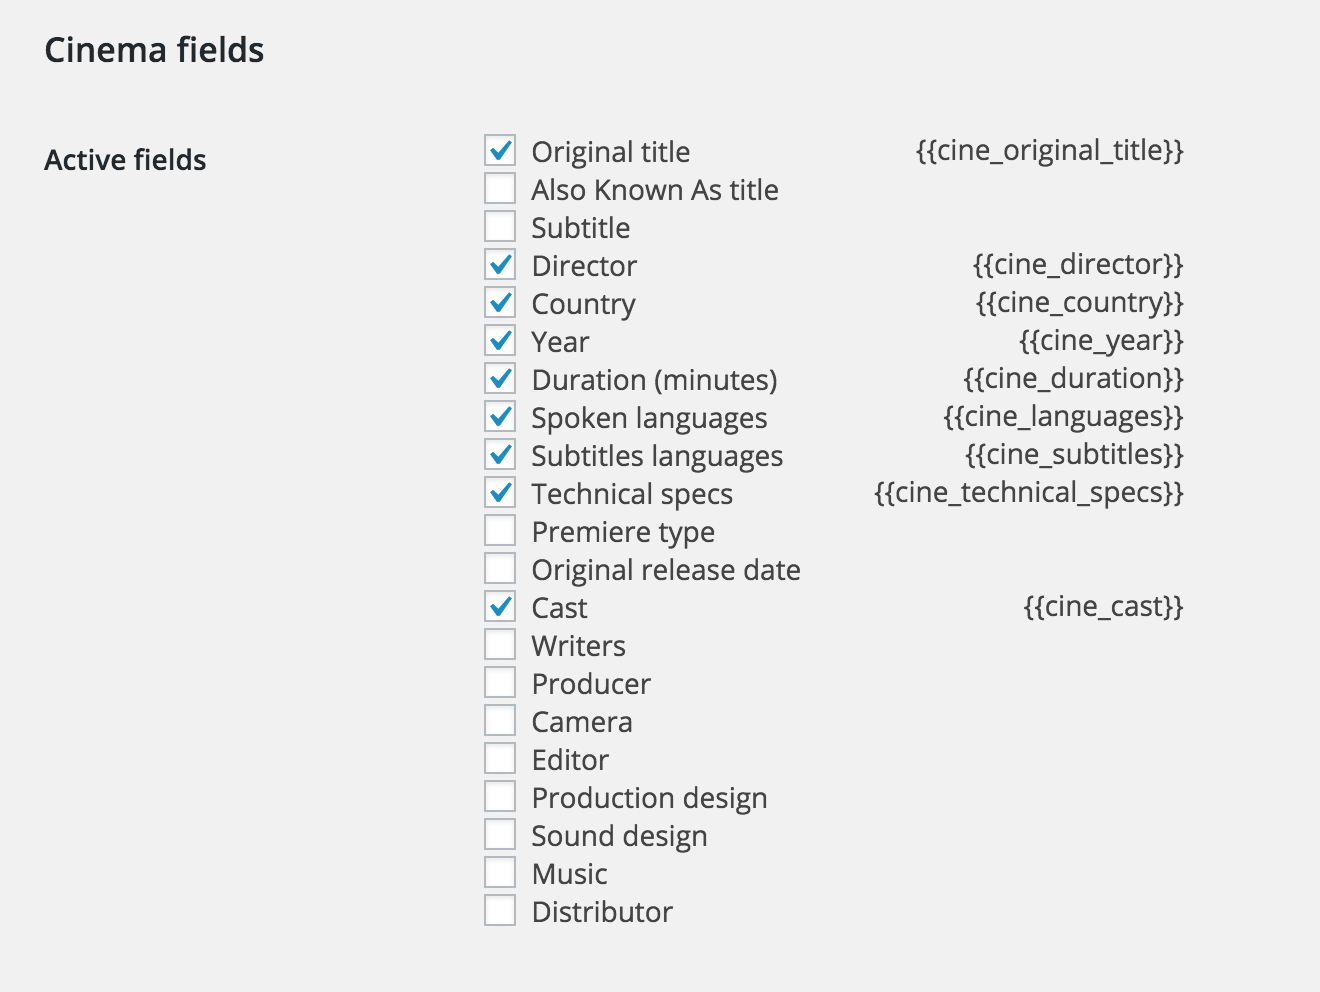 Choose which fields you'd like to use